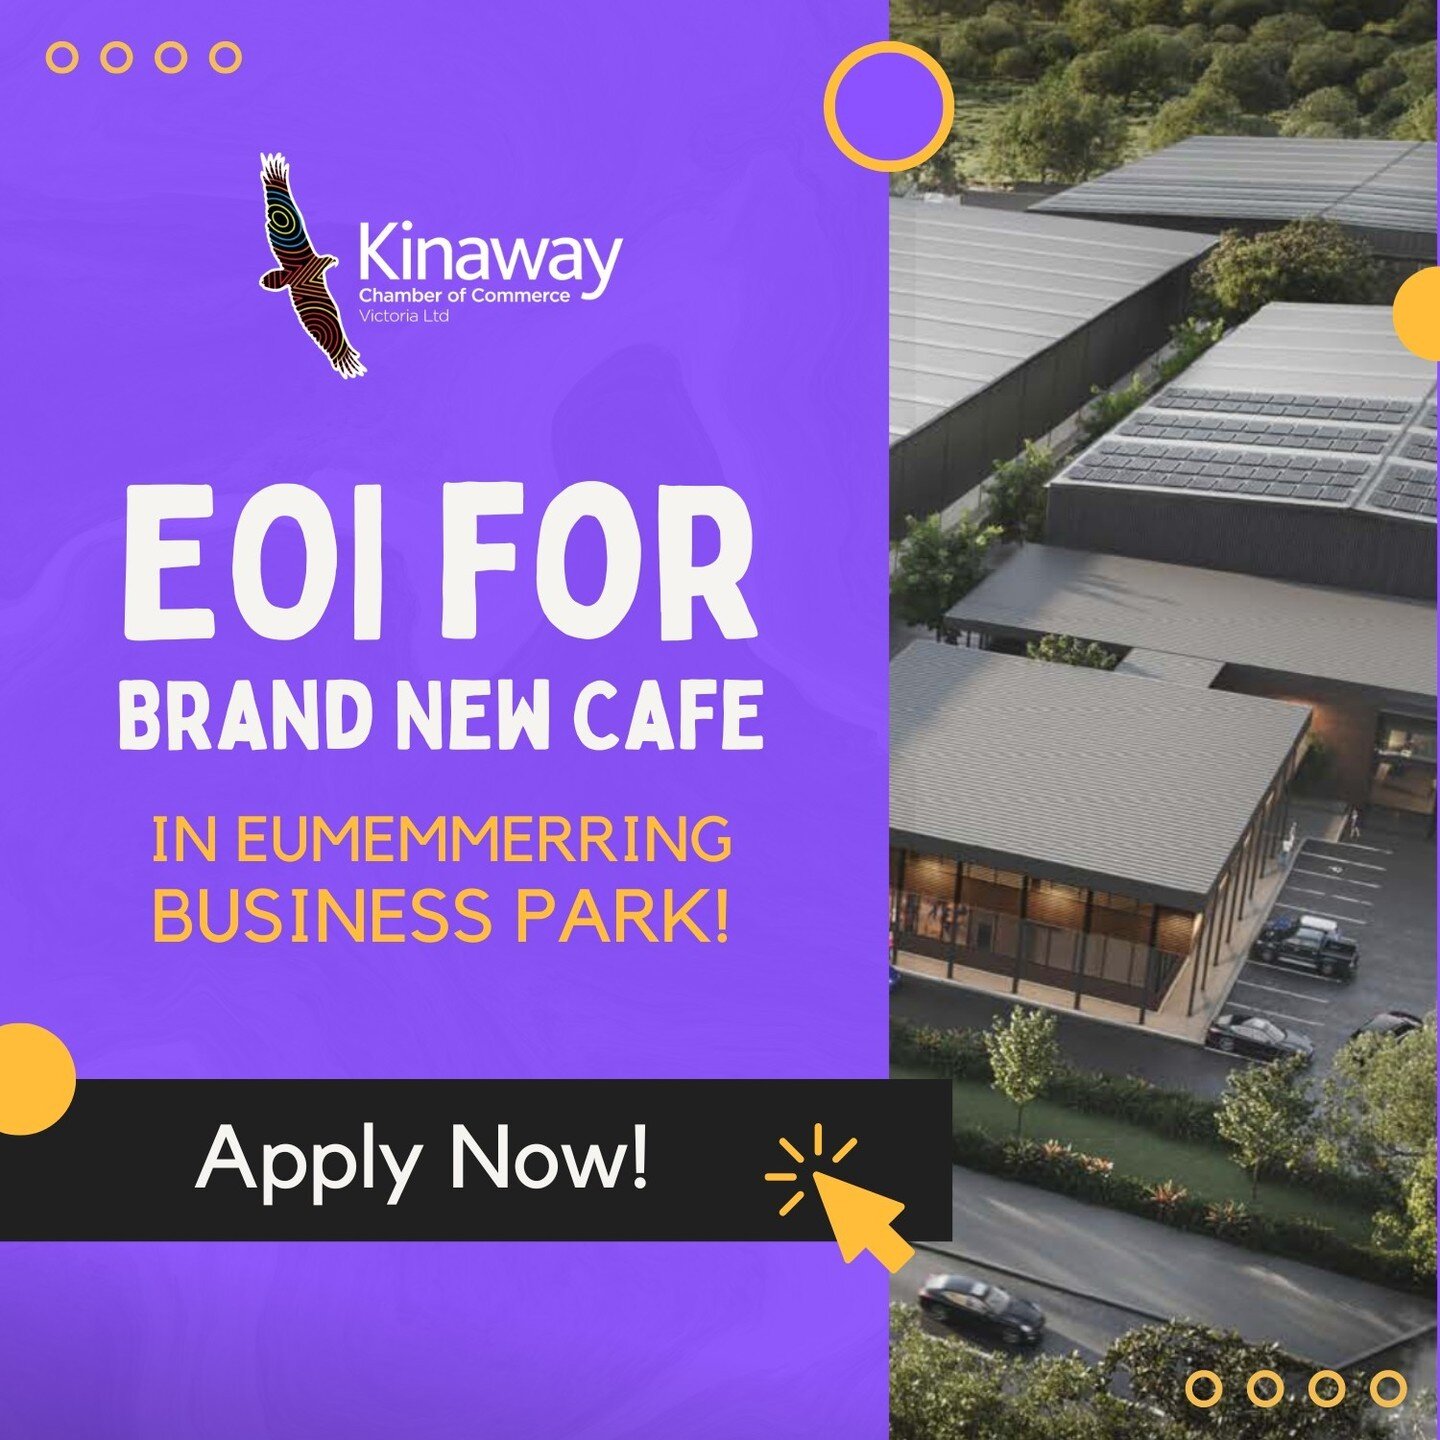 On behalf of the Goodman Group, Kinaway Chamber of Commerce is seeking expressions of interest for a First Nations caterer/caf&eacute; operator/social enterprise to operate the exclusive onsite caf&eacute; at Eumemmerring Business Park located in Dan